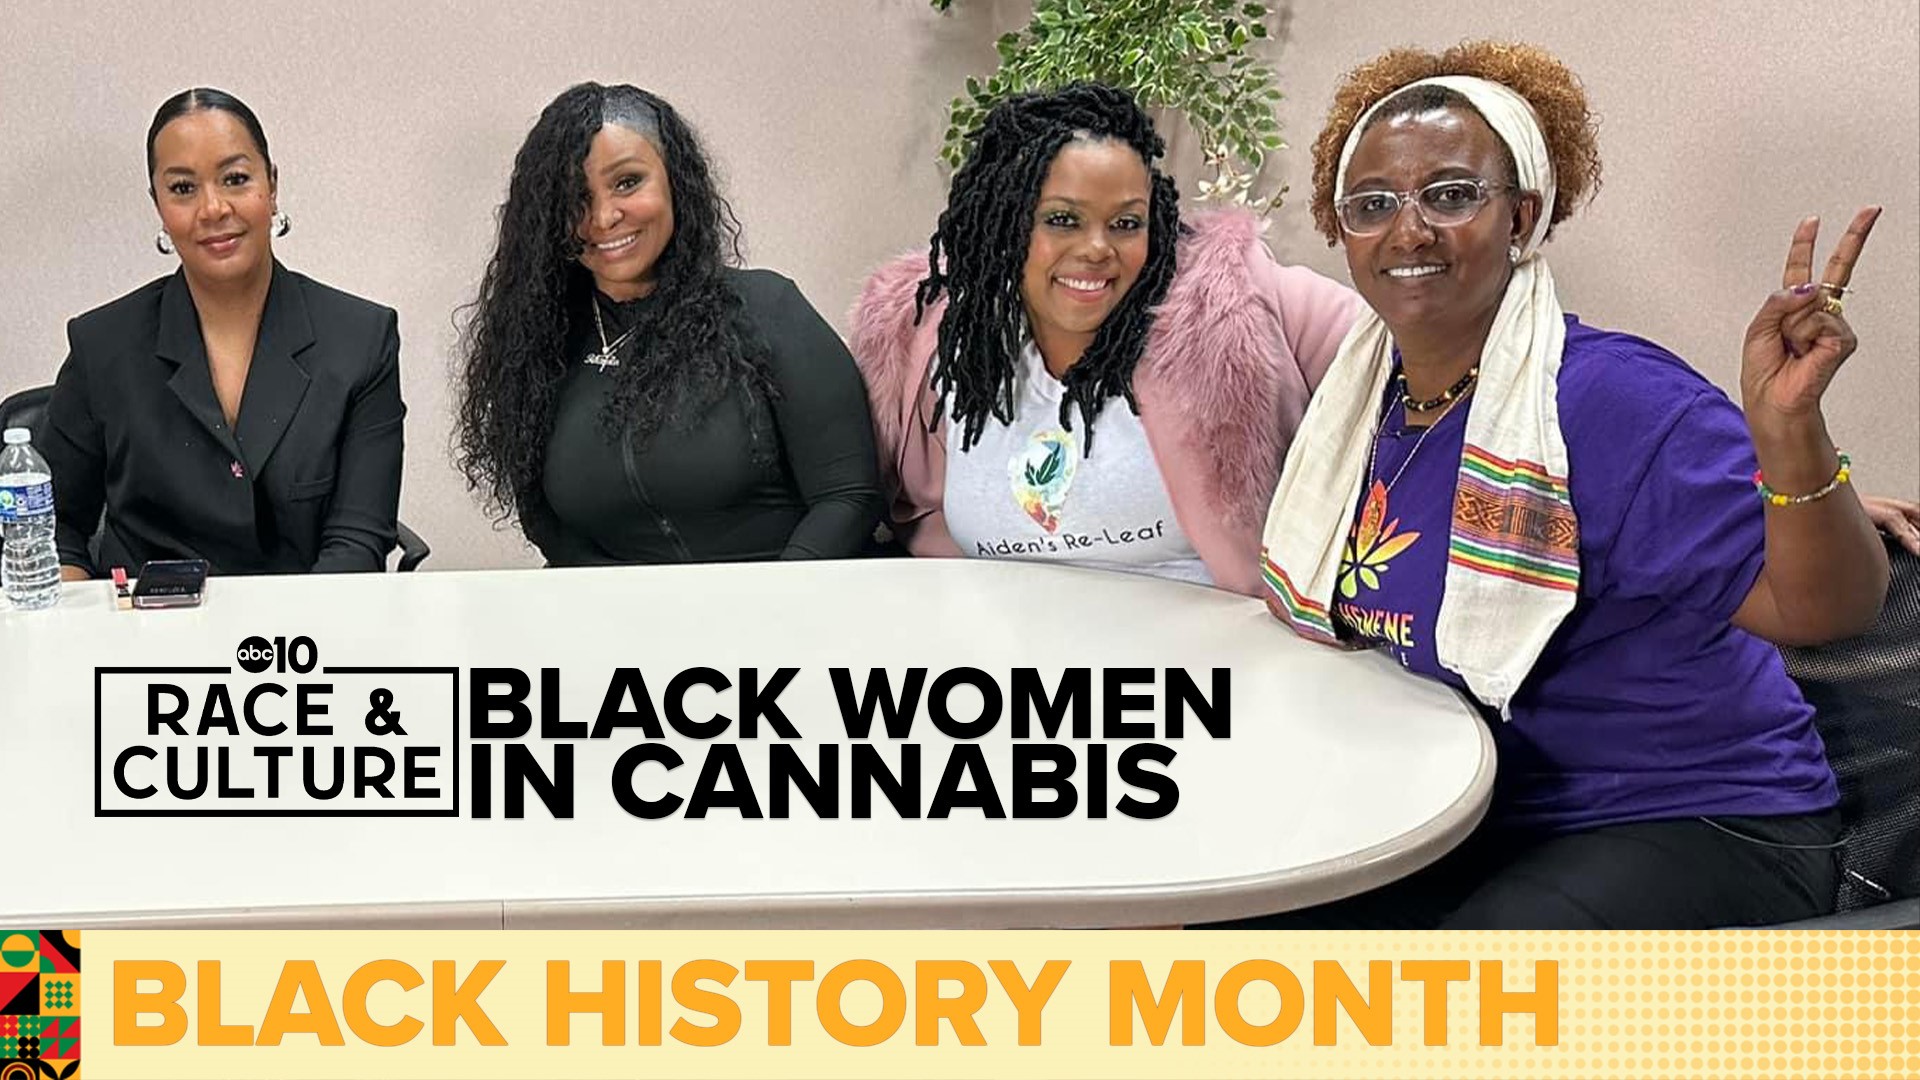 Four Black women have an open discussion on their journey to success within the cannabis industry.